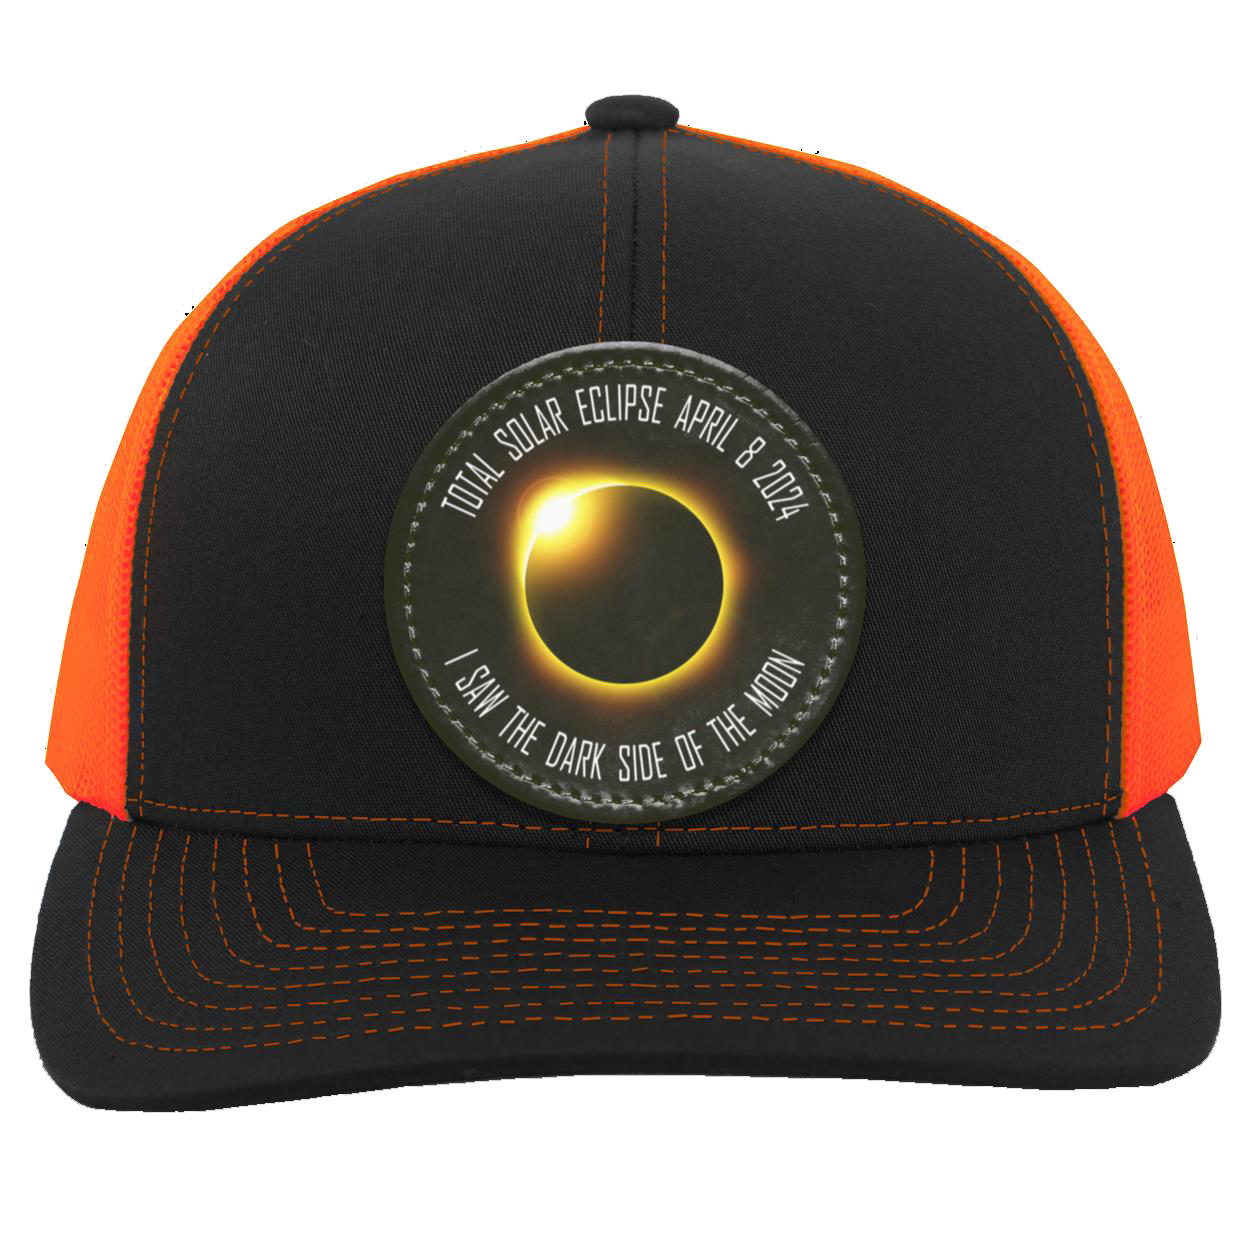 Total Solar Eclipse April 8 2024 eclipse hat cap, I Saw the Dark Side of the Moon, Eclipse gift, Trucker Snap Back - Patch